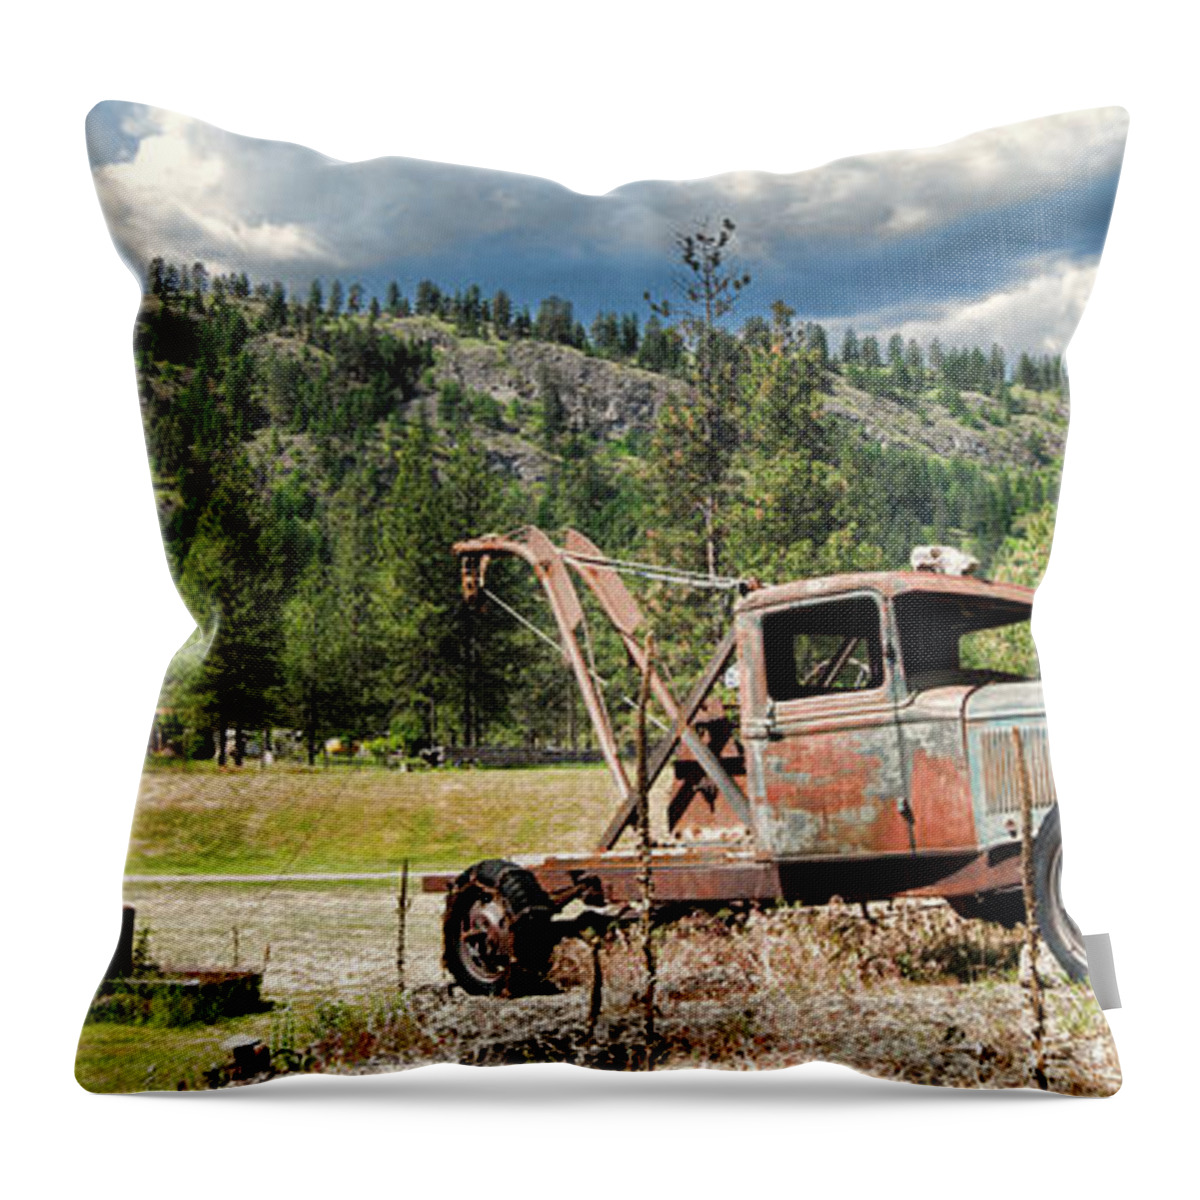 Tow Throw Pillow featuring the photograph 24 7 365 Towing by Allan Van Gasbeck